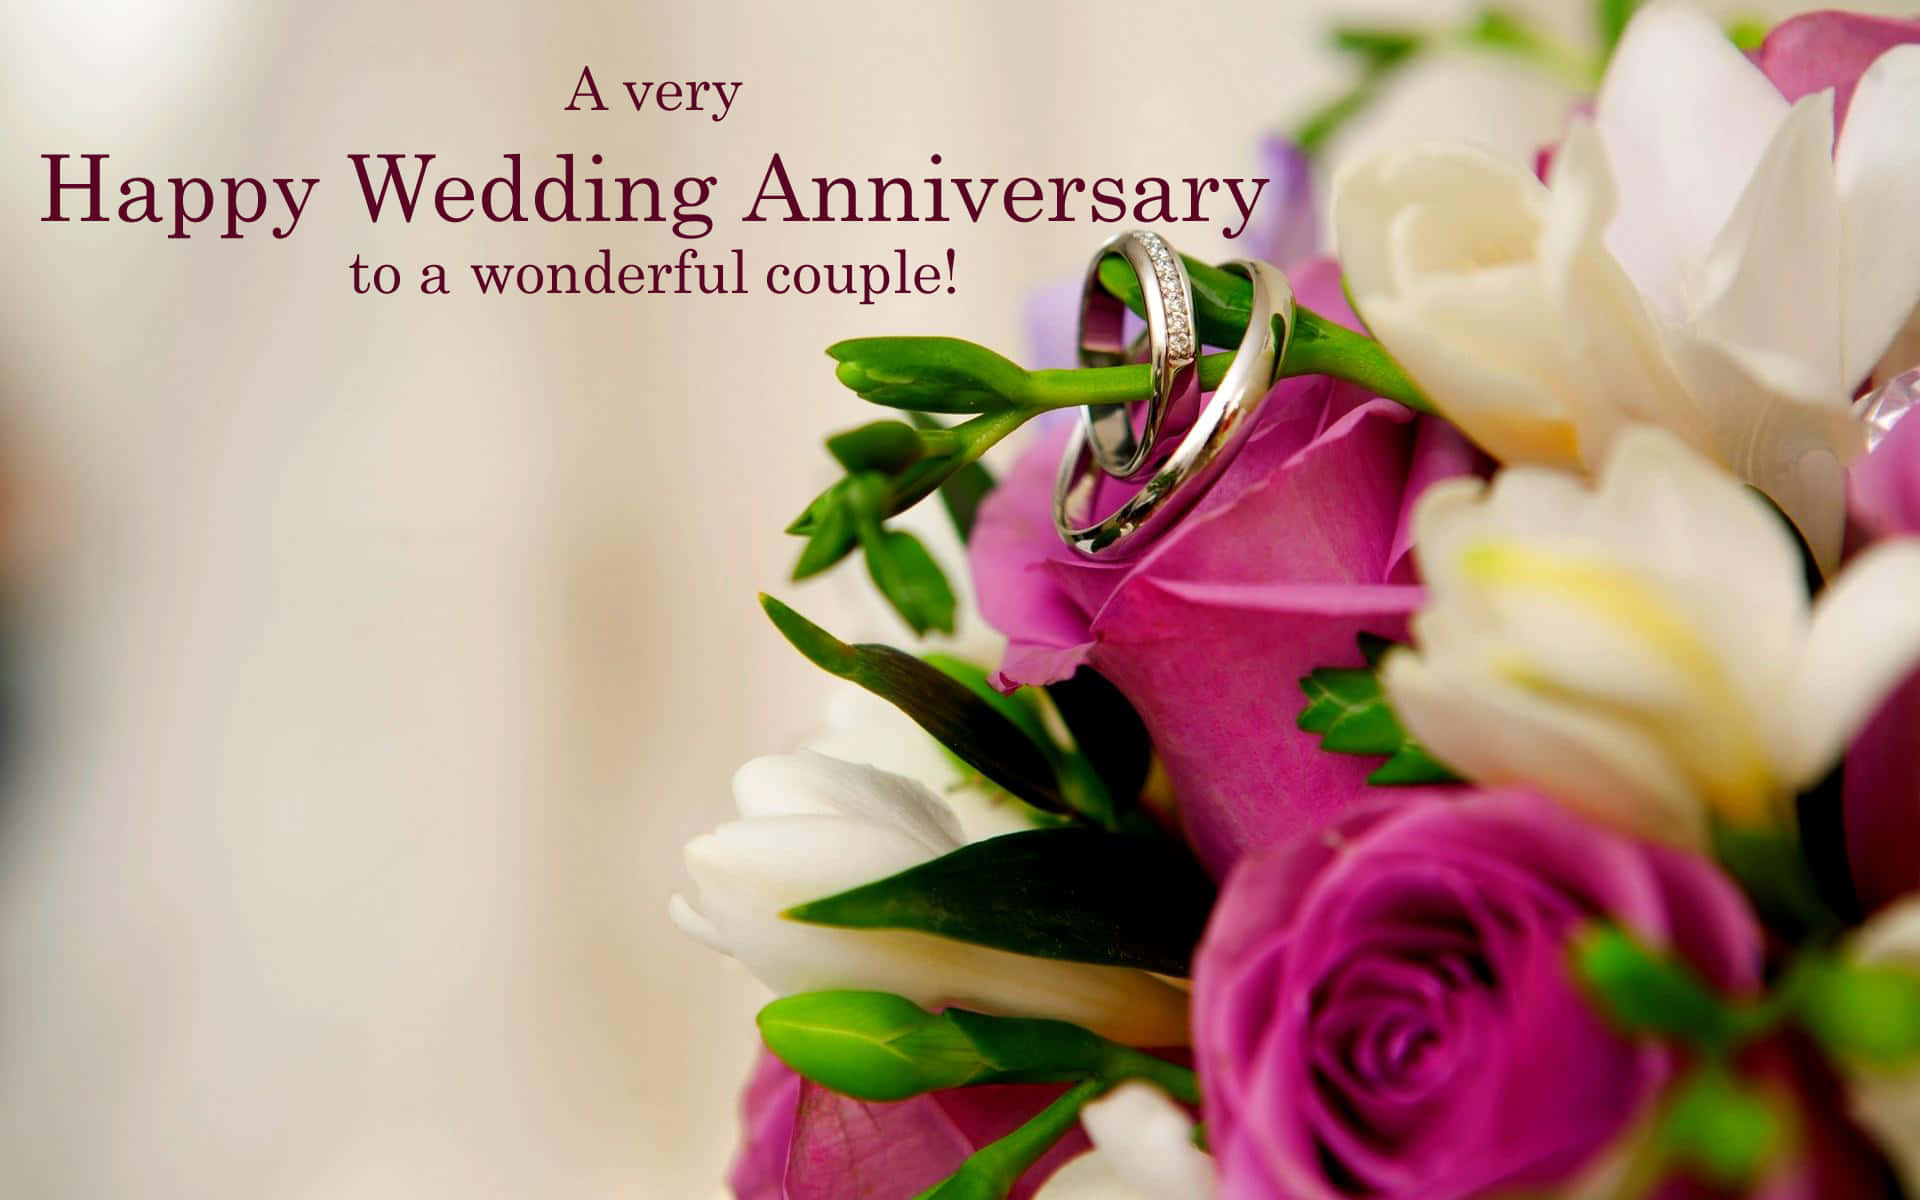 Celebrate your anniversary with a special moment.